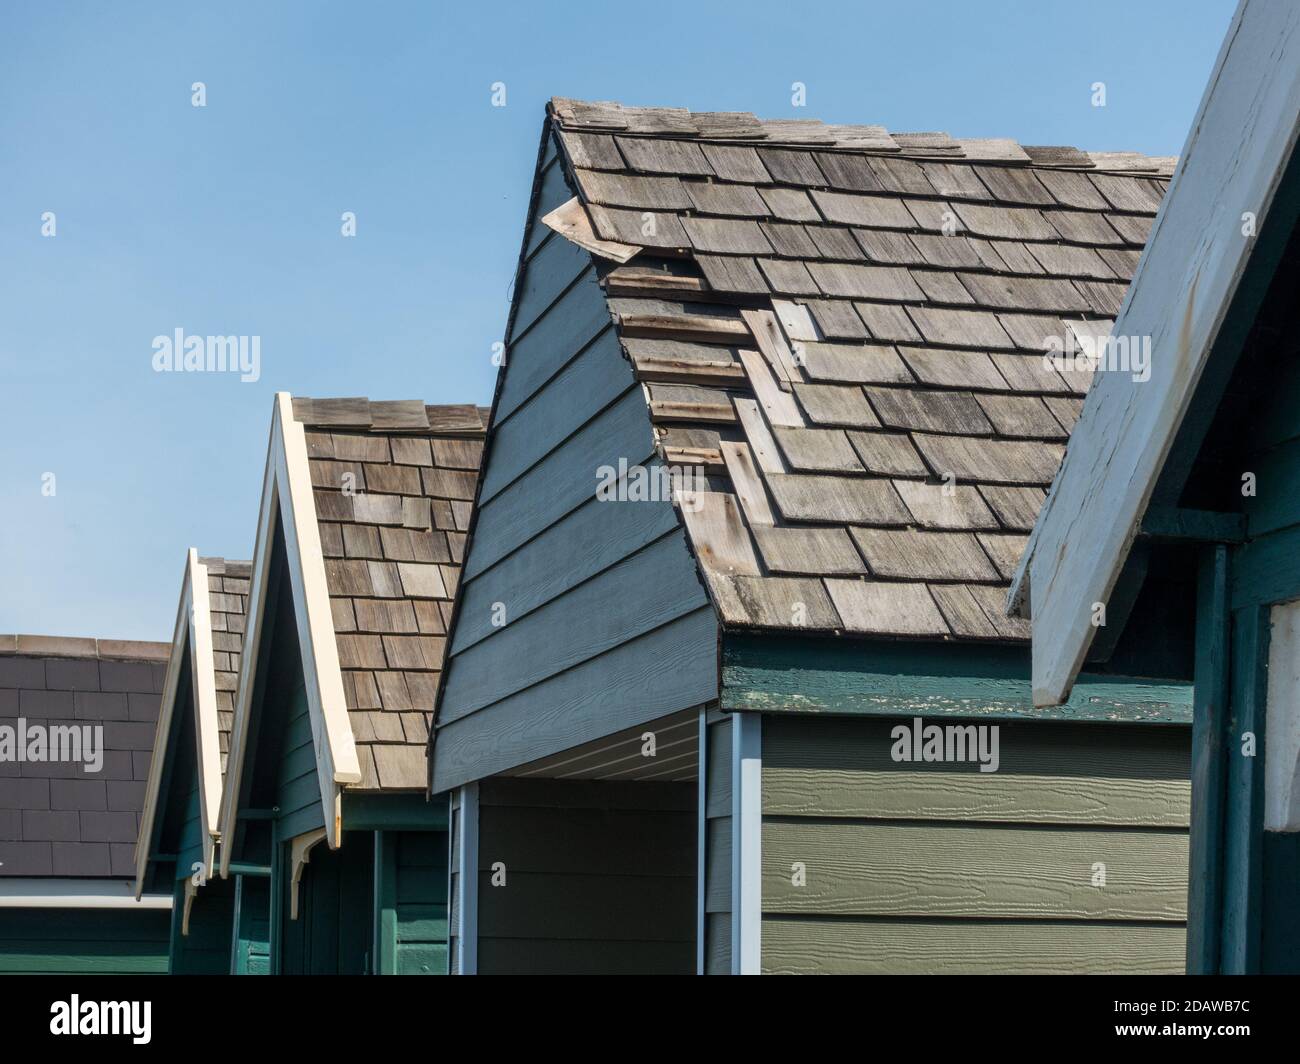 Beach hut roof tiles missing after coastal storm wind damage Stock Photo